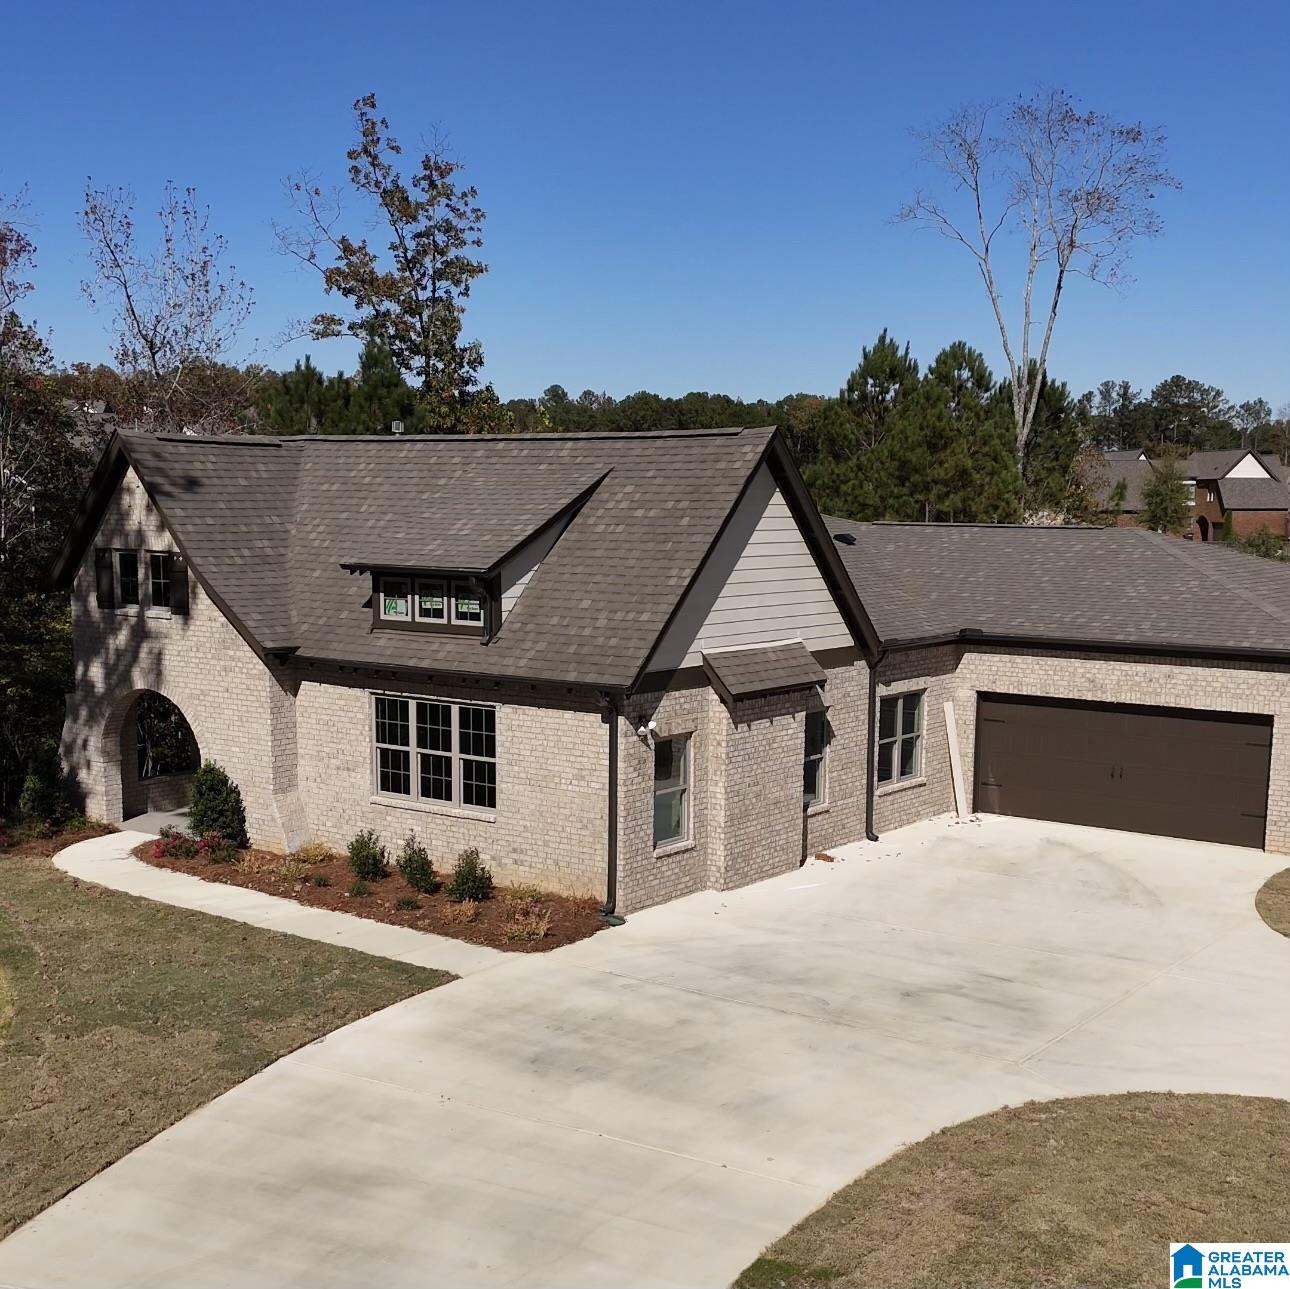 New Construction Homes For Sale In Birmingham, AL - eXp Realty®